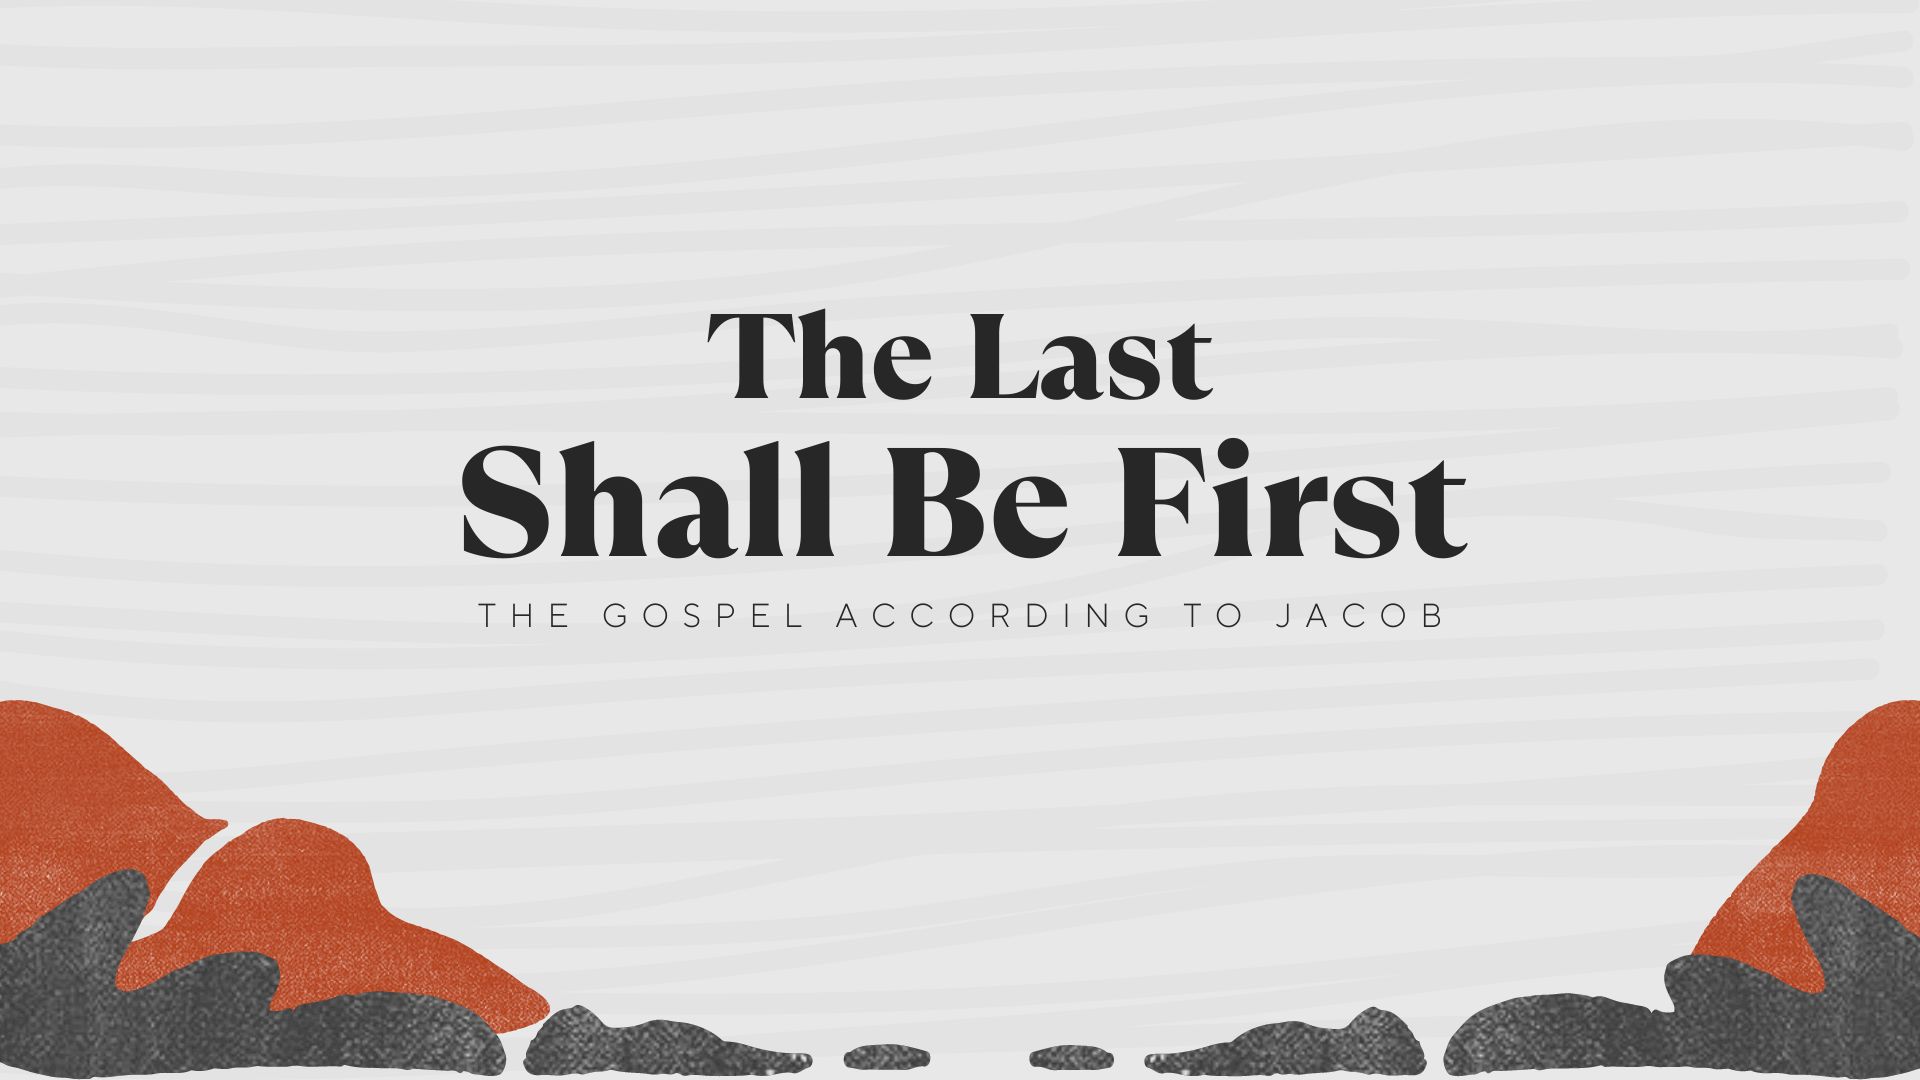 The Last Shall Be First: Immanuel